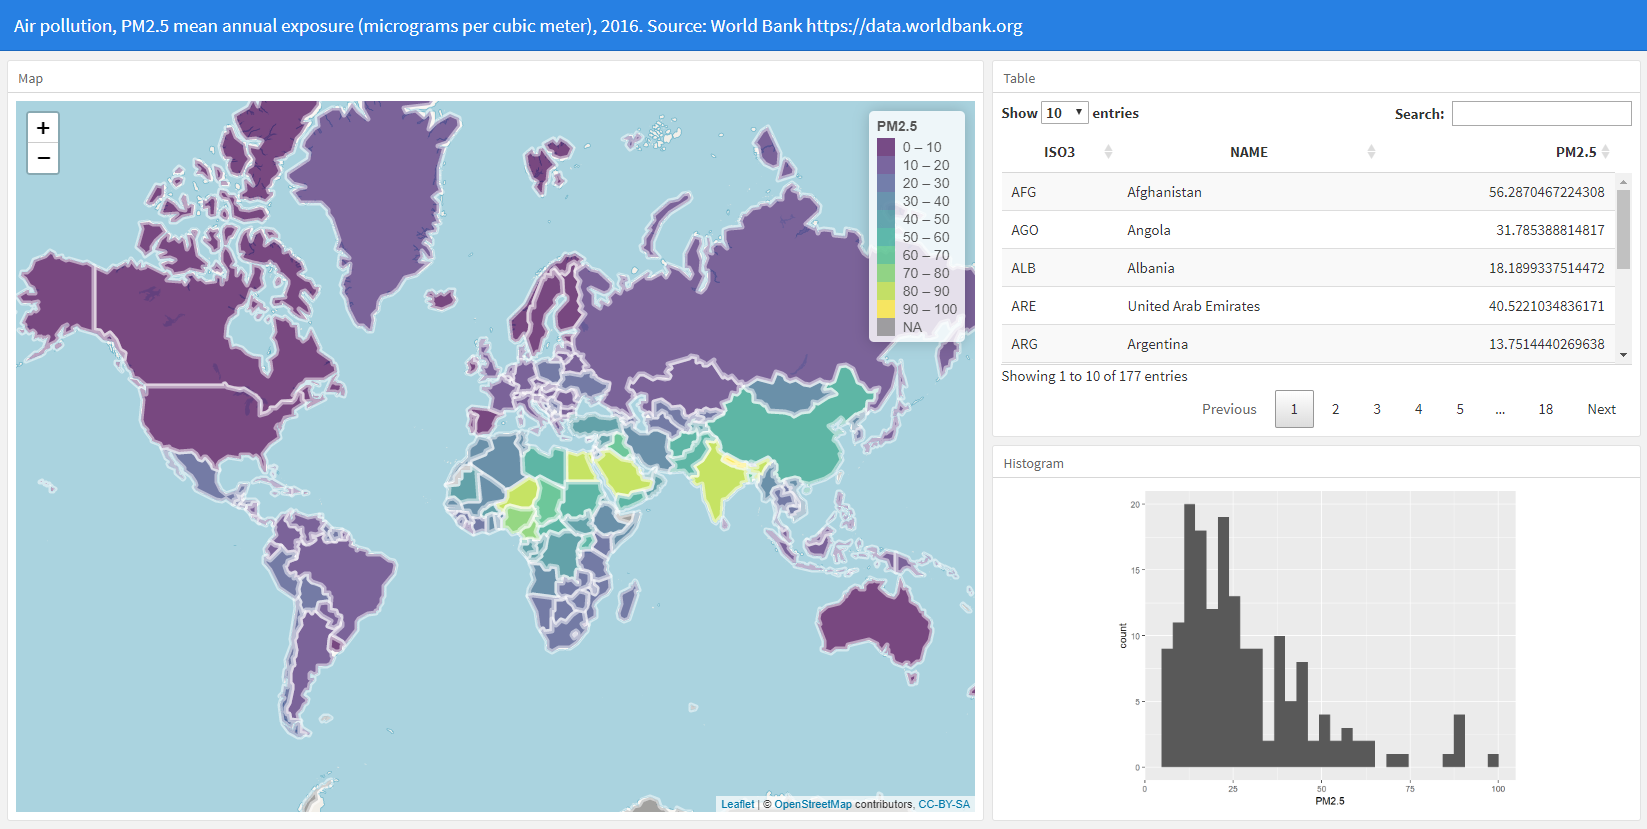 Snapshot of the dashboard to visualize air pollution data.